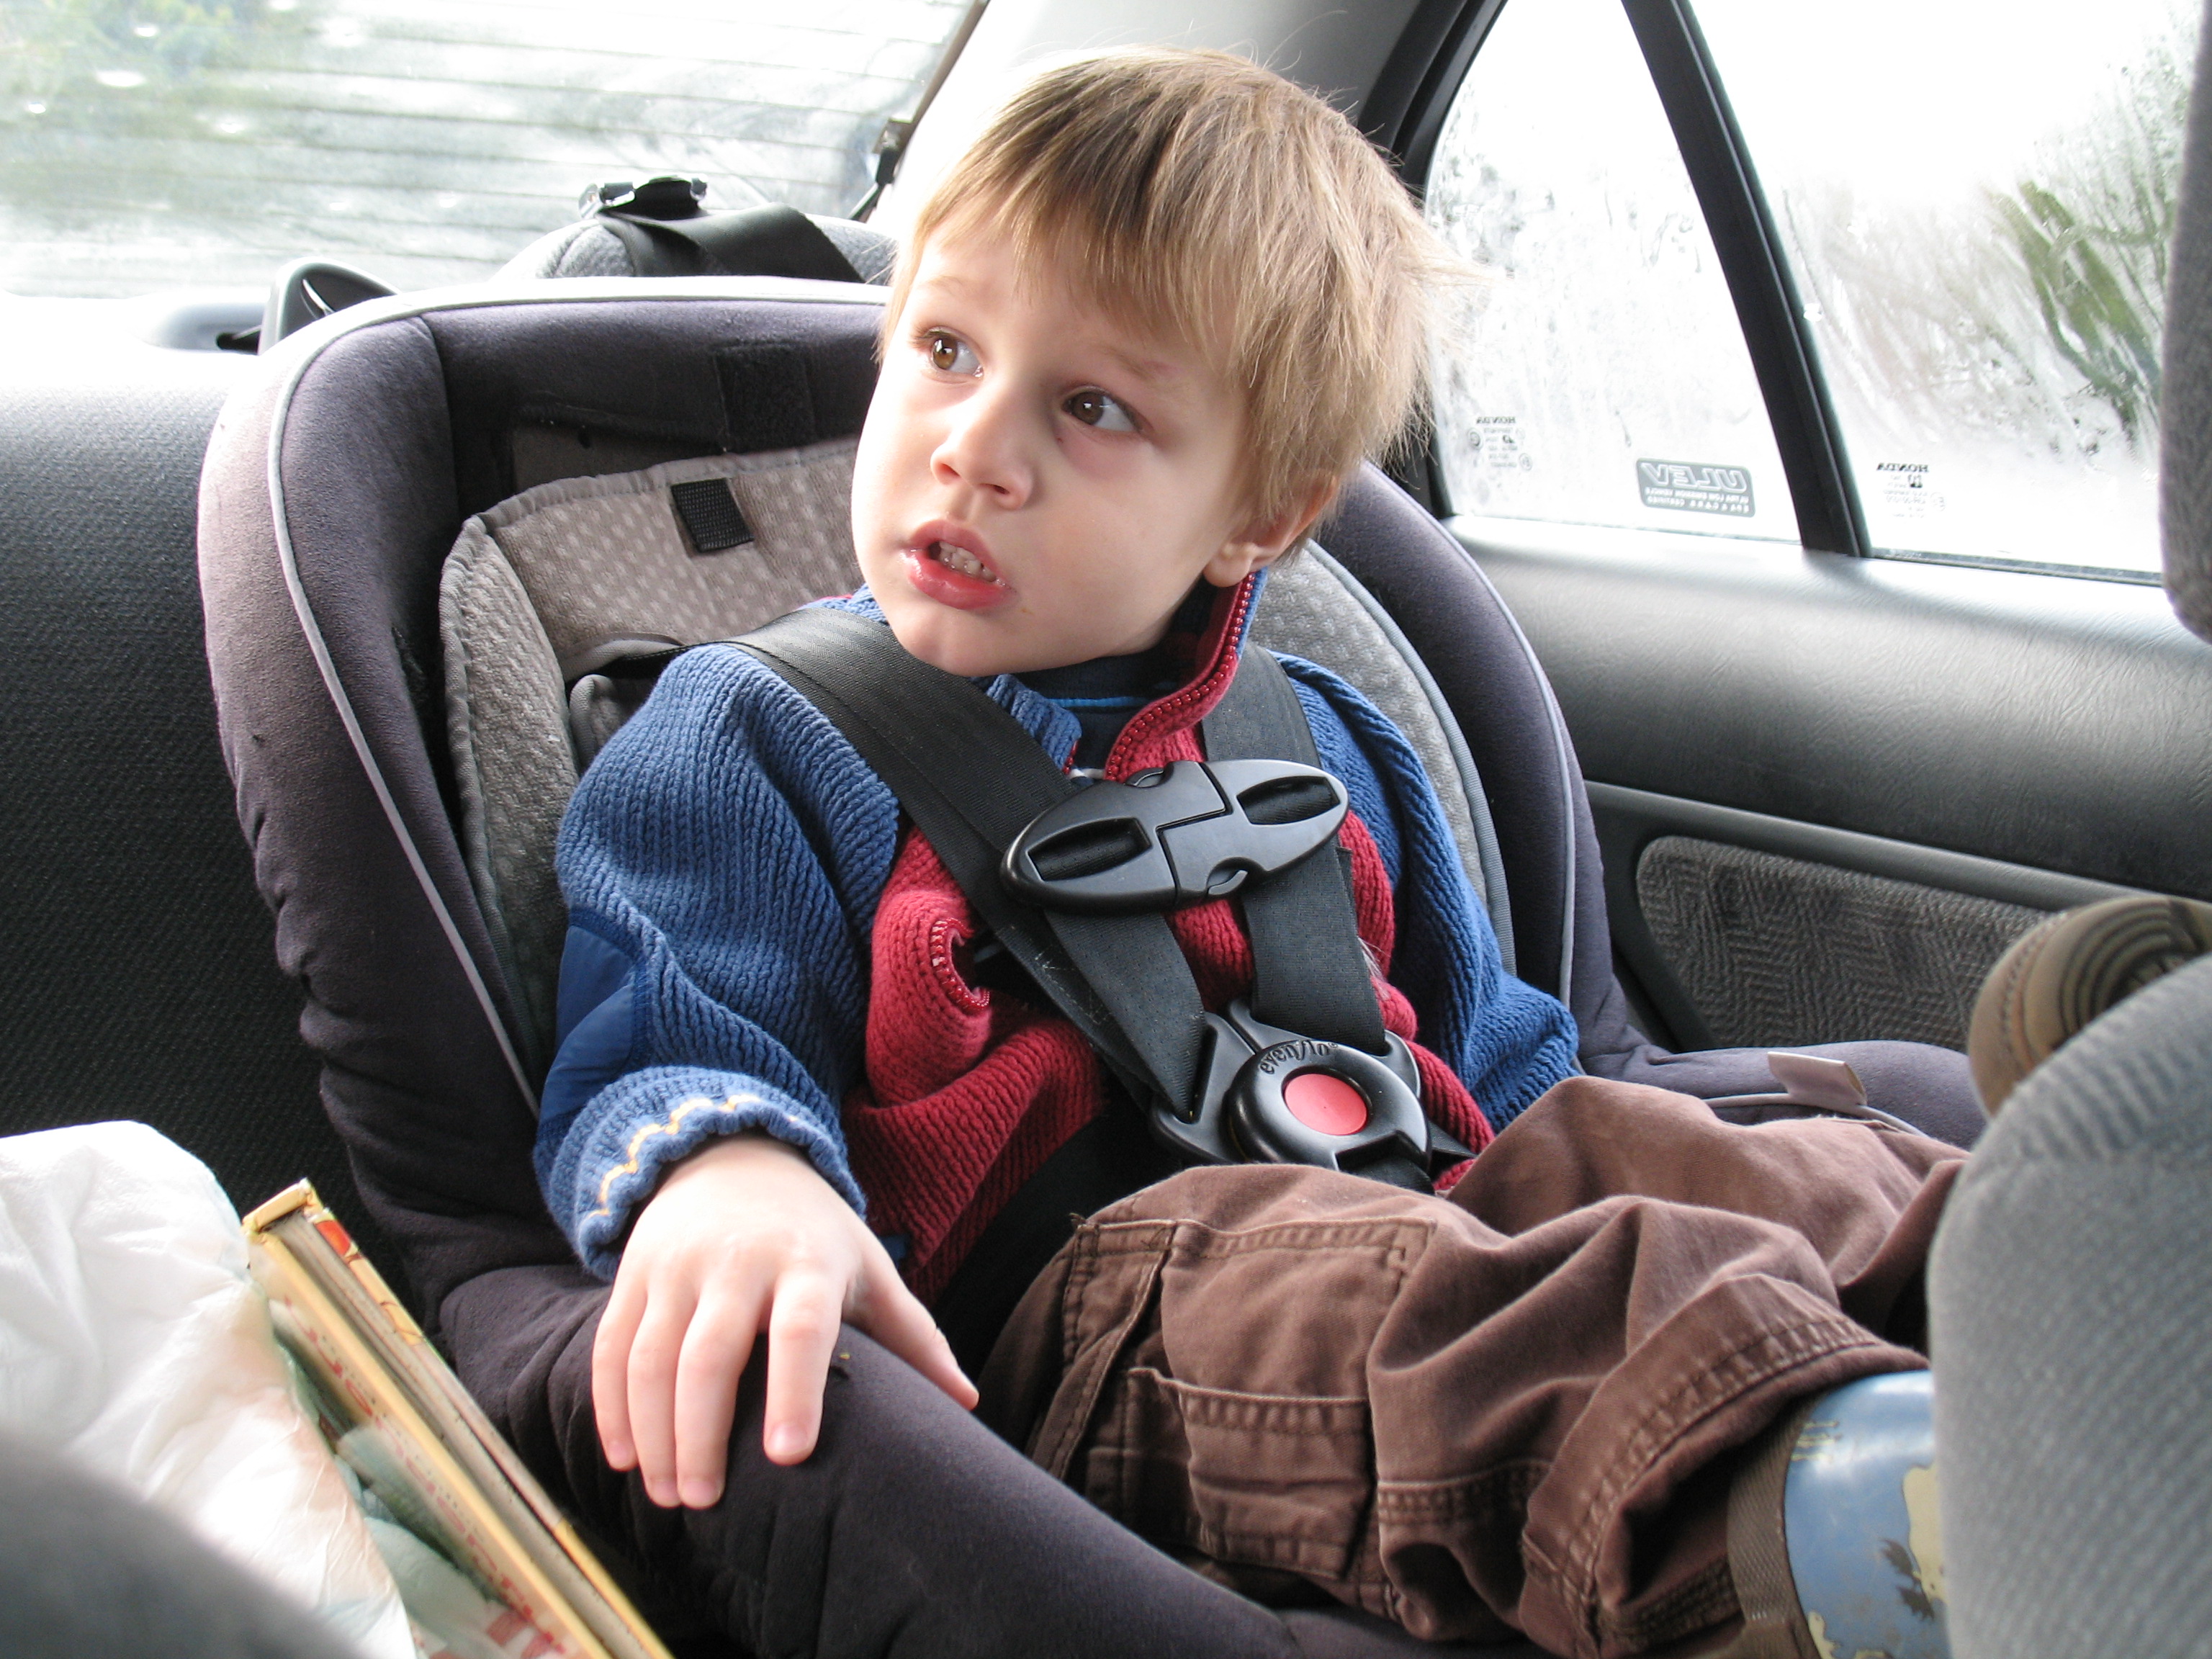 Young boy in a car seat; image by xordroyd, via Flickr, CC BY-SA 2.0, no changes.